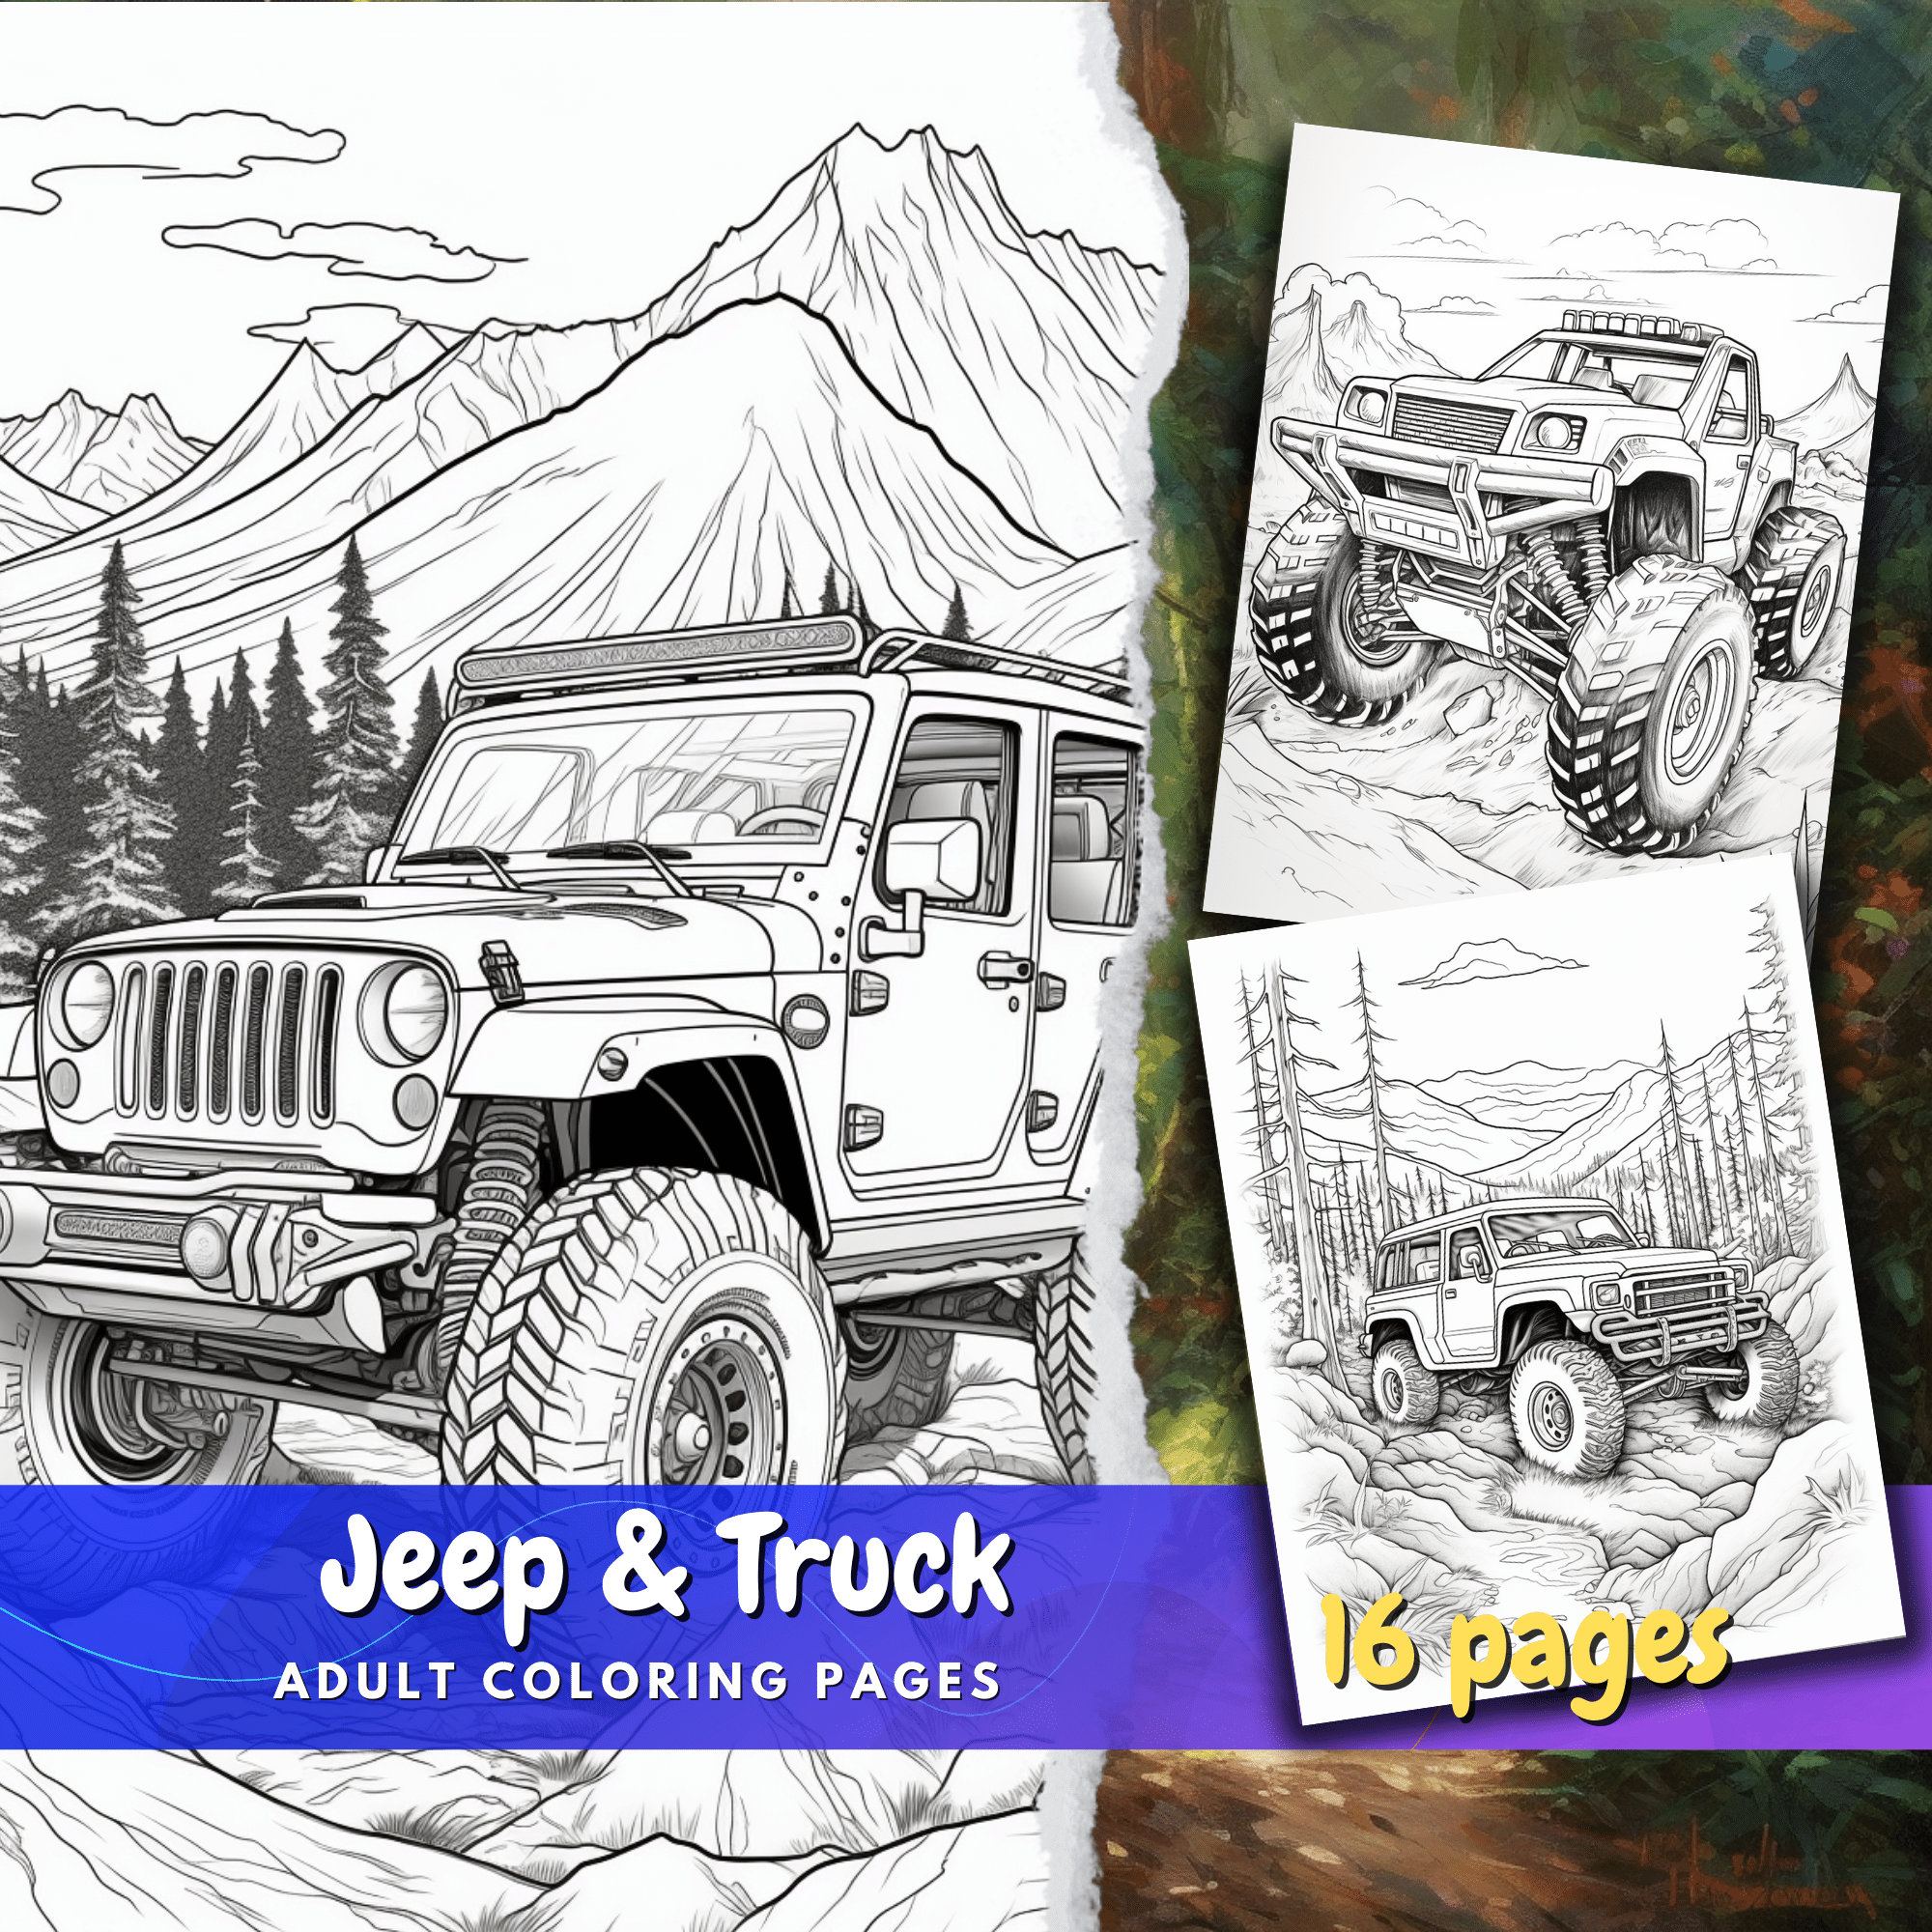 Jeep coloring page and truck coloring pages gift for adults coloring page download now